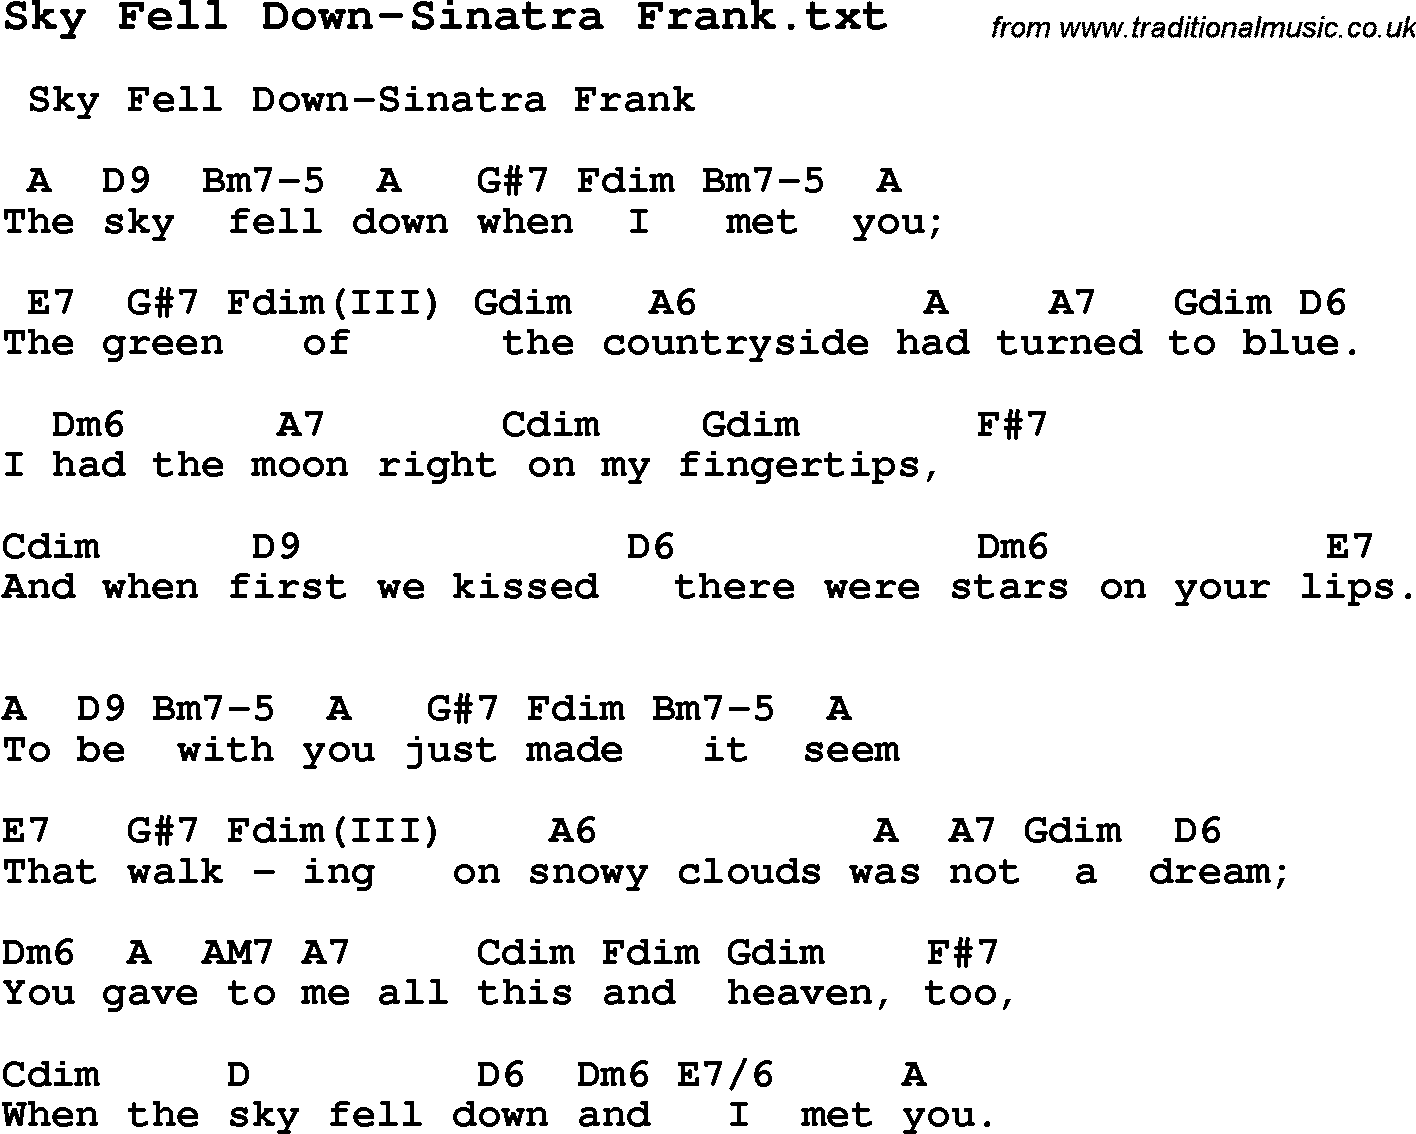 Jazz Song from top bands and vocal artists with chords, tabs and lyrics - Sky Fell Down-Sinatra Frank